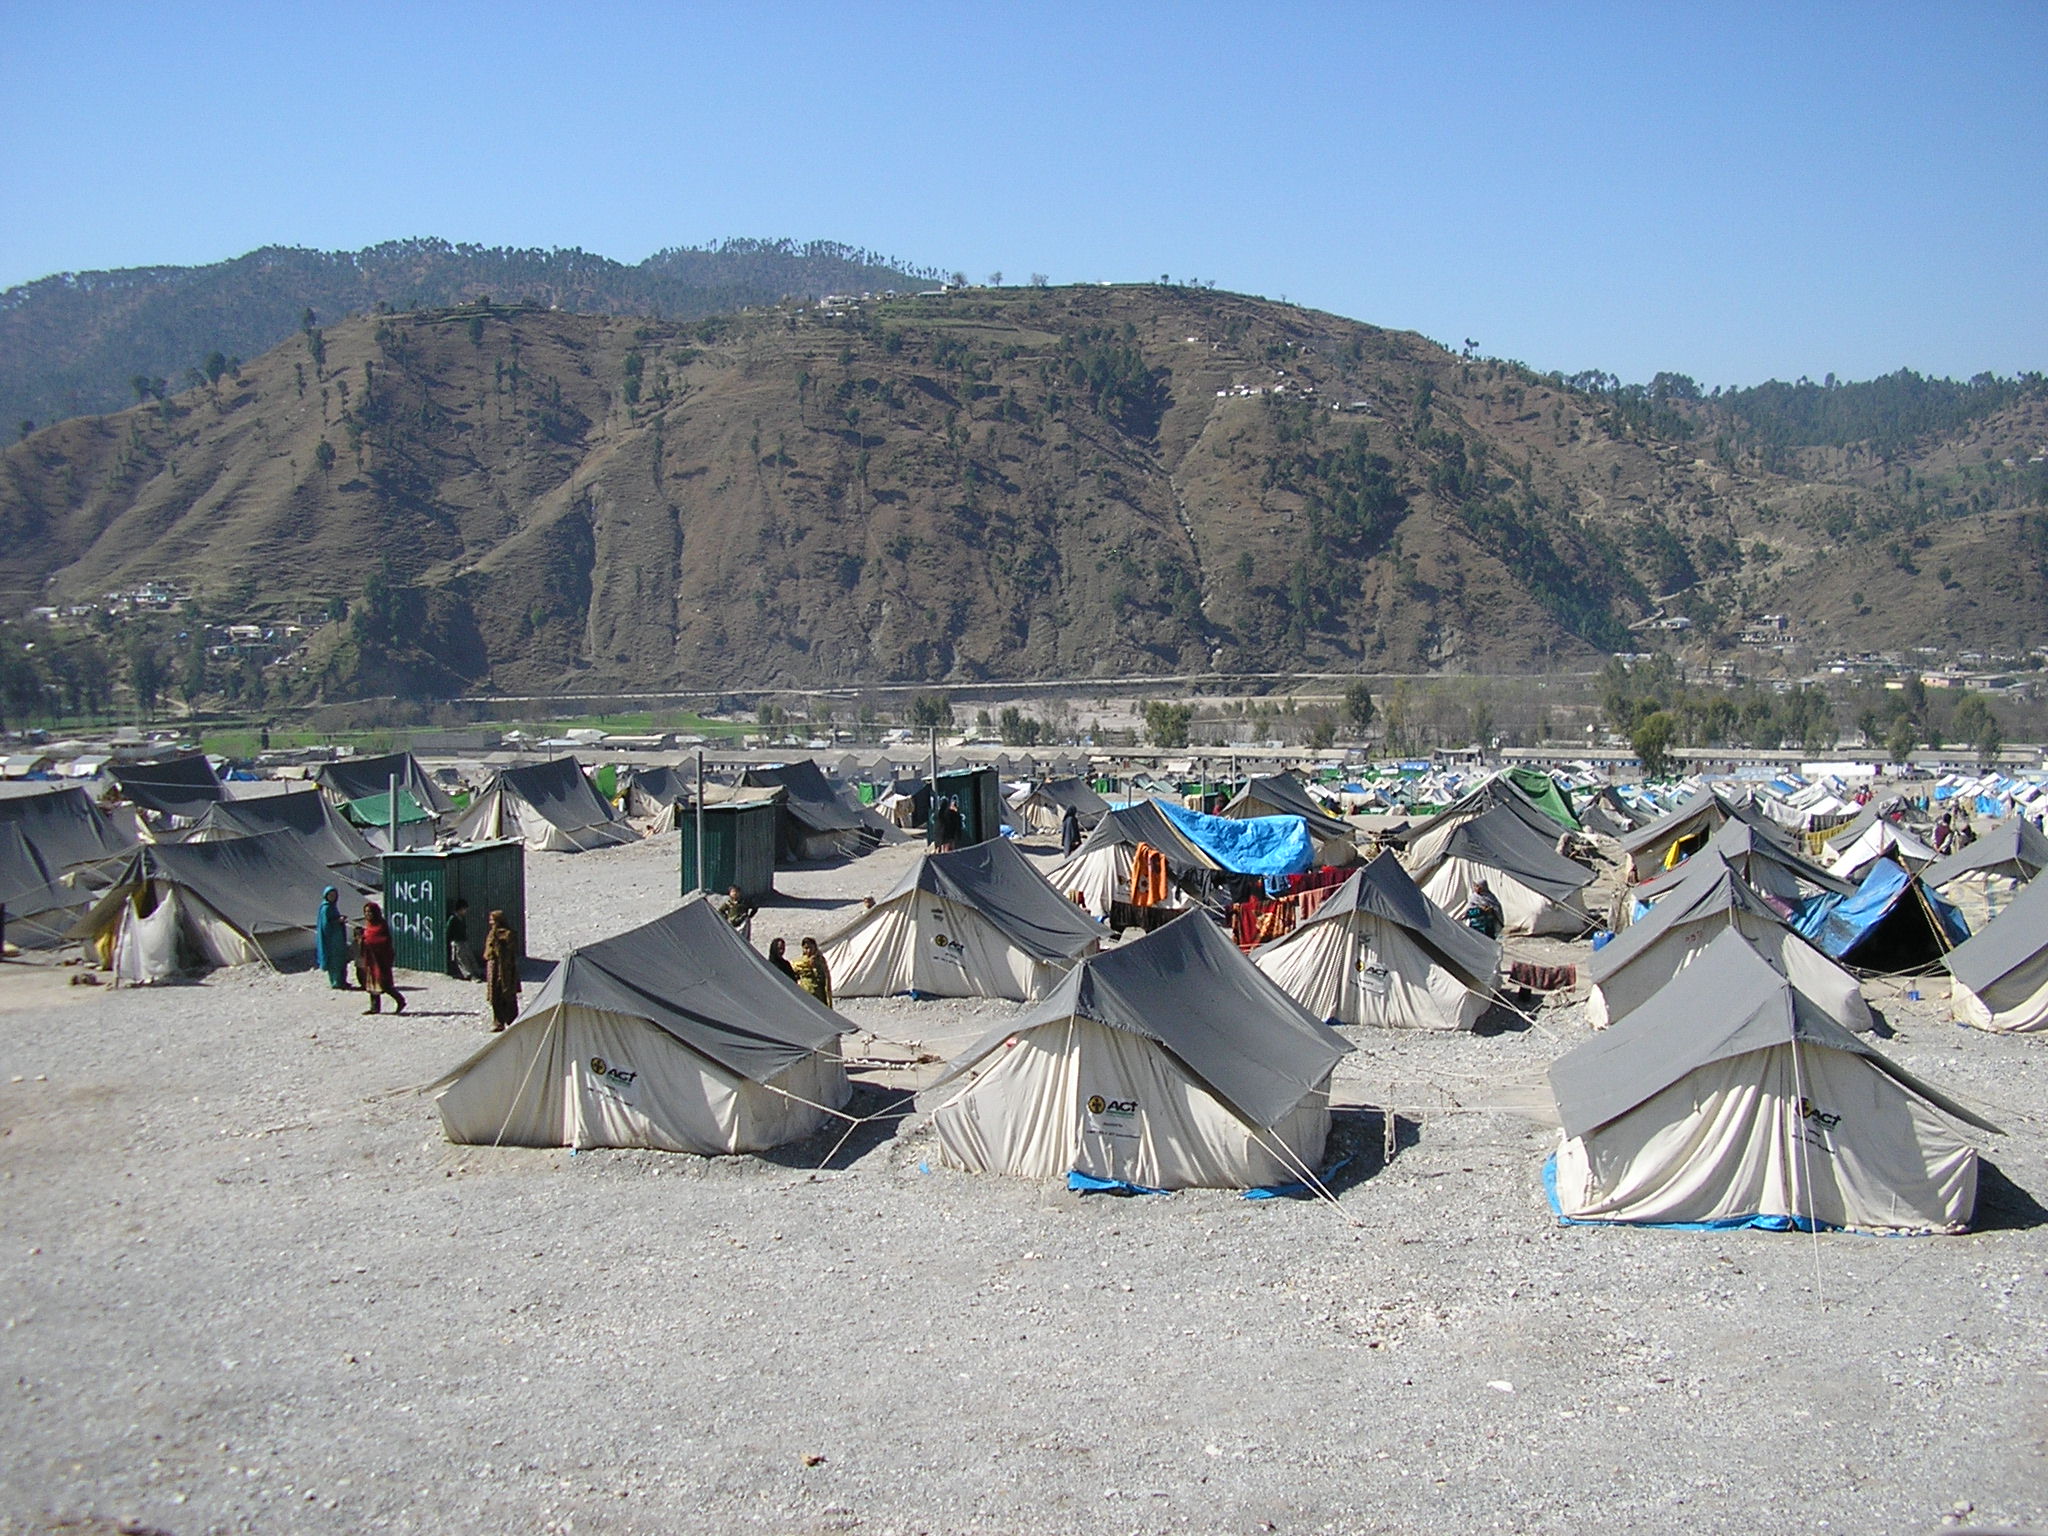 One of the three camps reviewed as part of the workshop